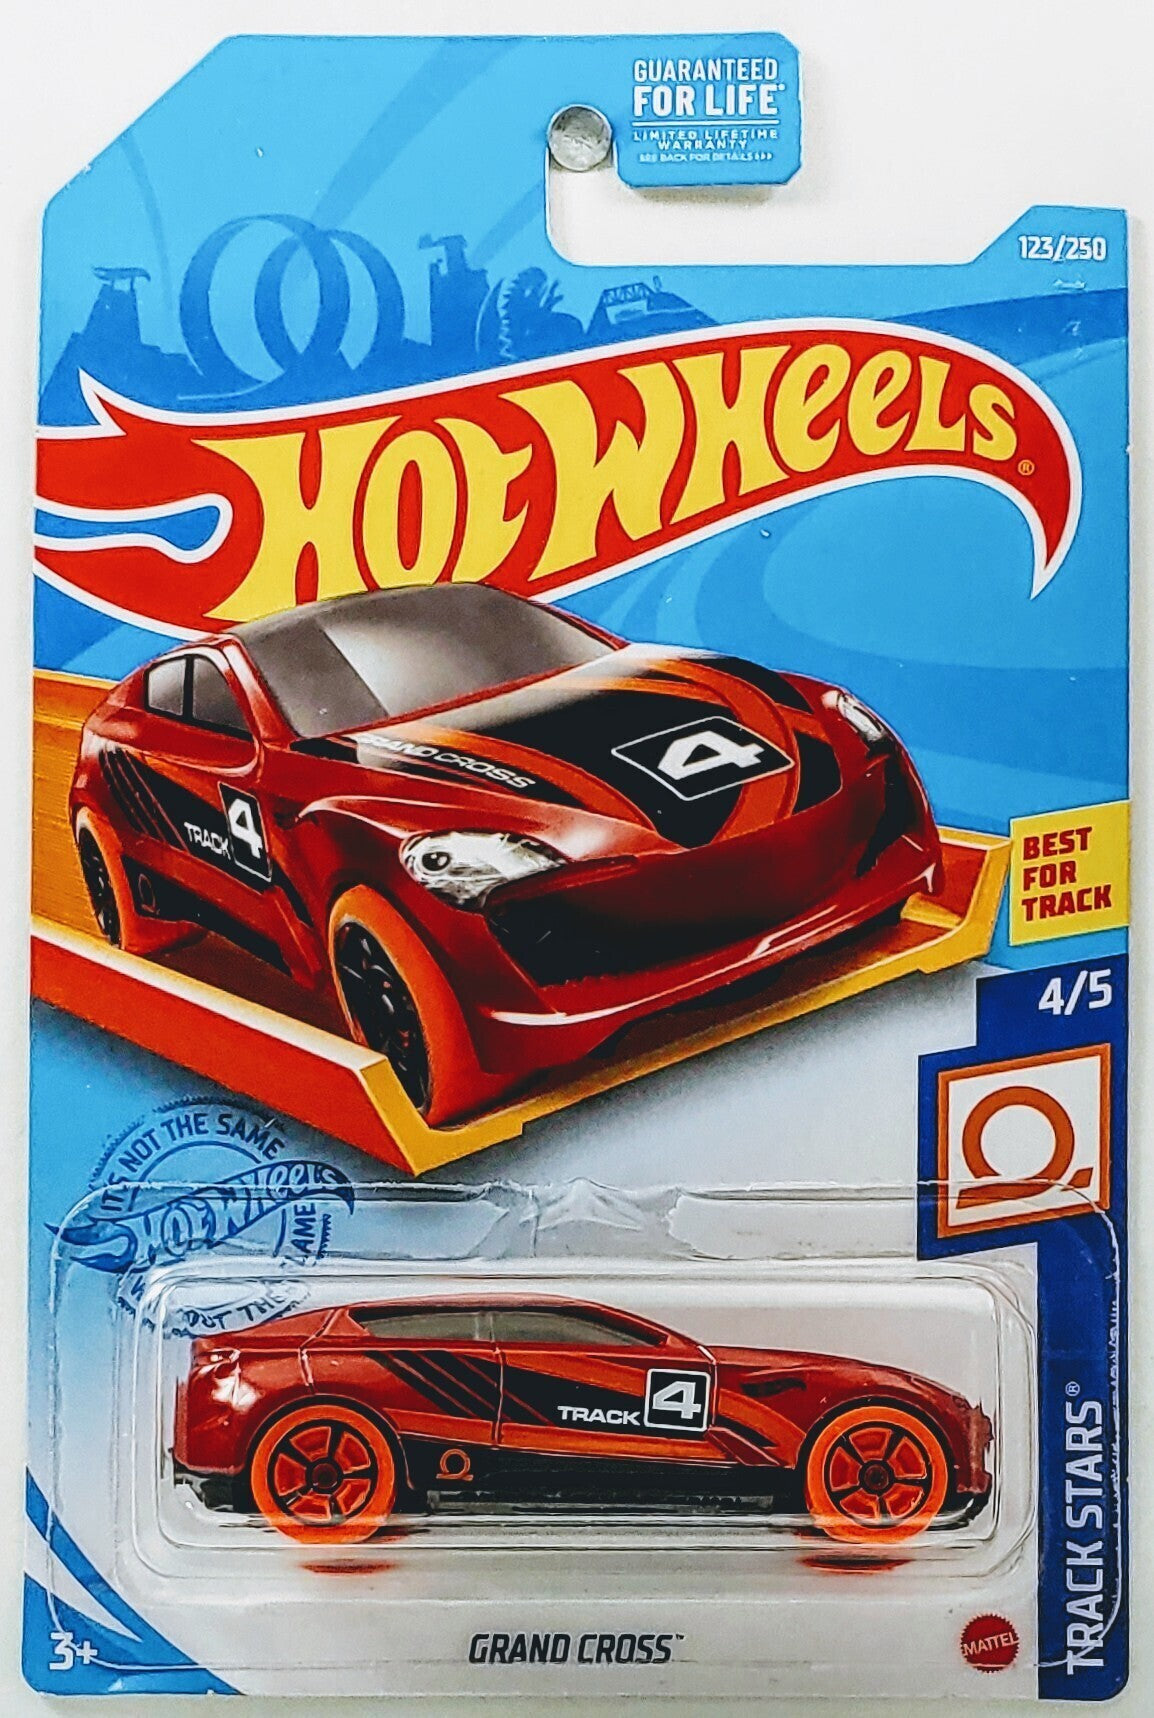 Hot Wheels 2021 - Collector # 123/250 - Track Stars 4/5 - Grand Cross - Red